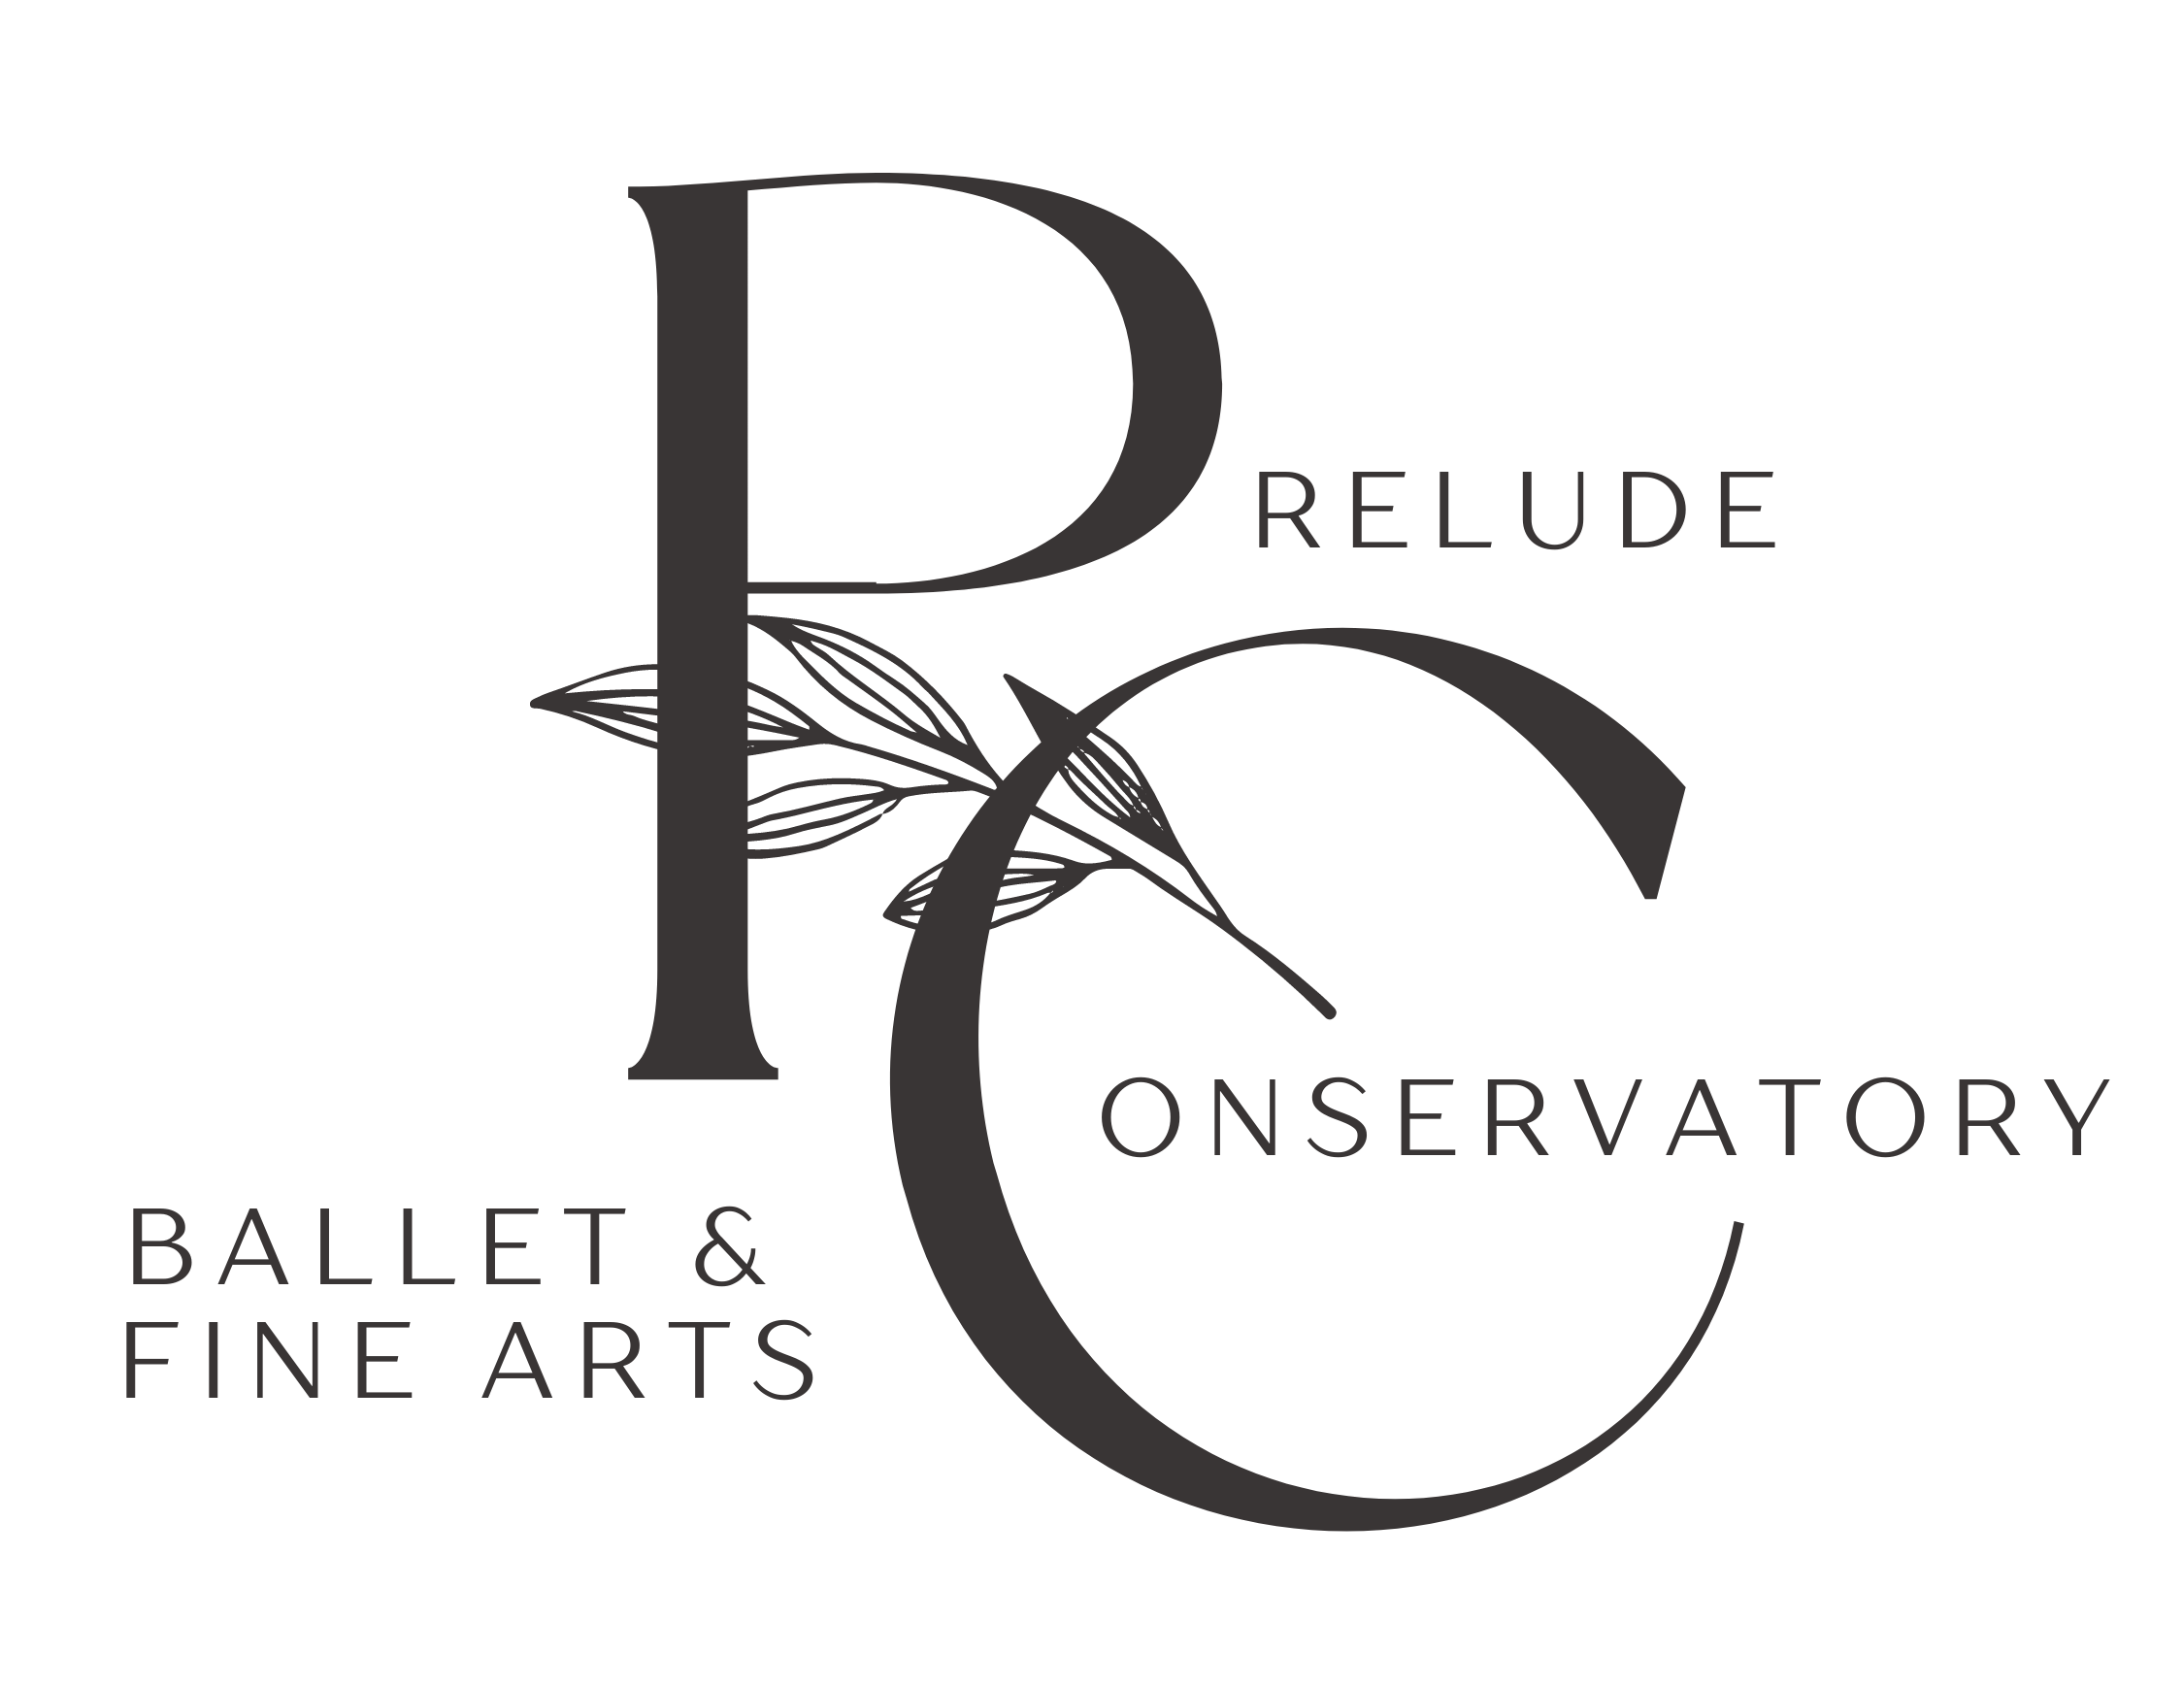 Prelude Conservatory